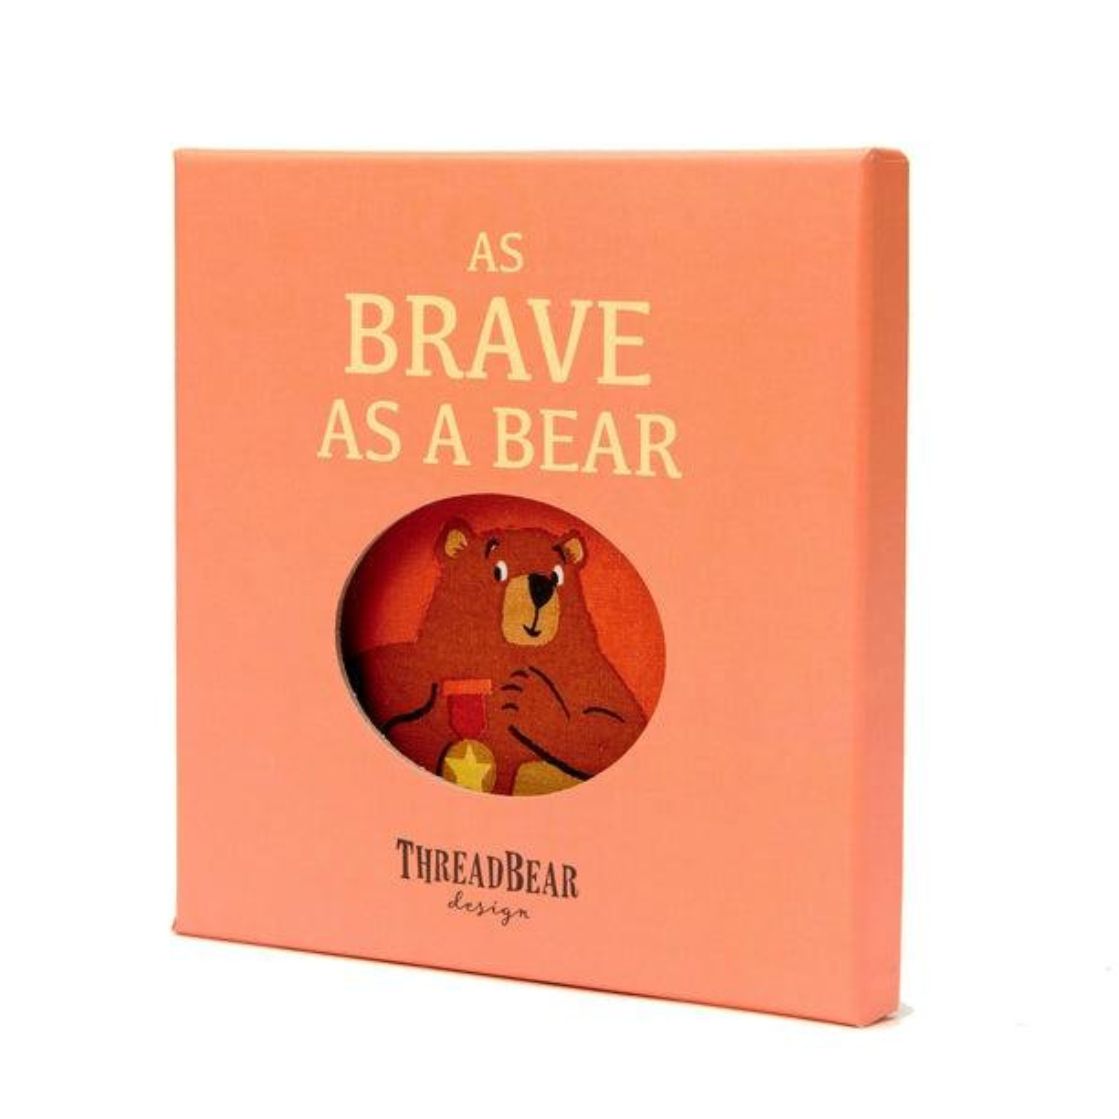 Cloth rag book featuring illustrations and a story about a brave bear